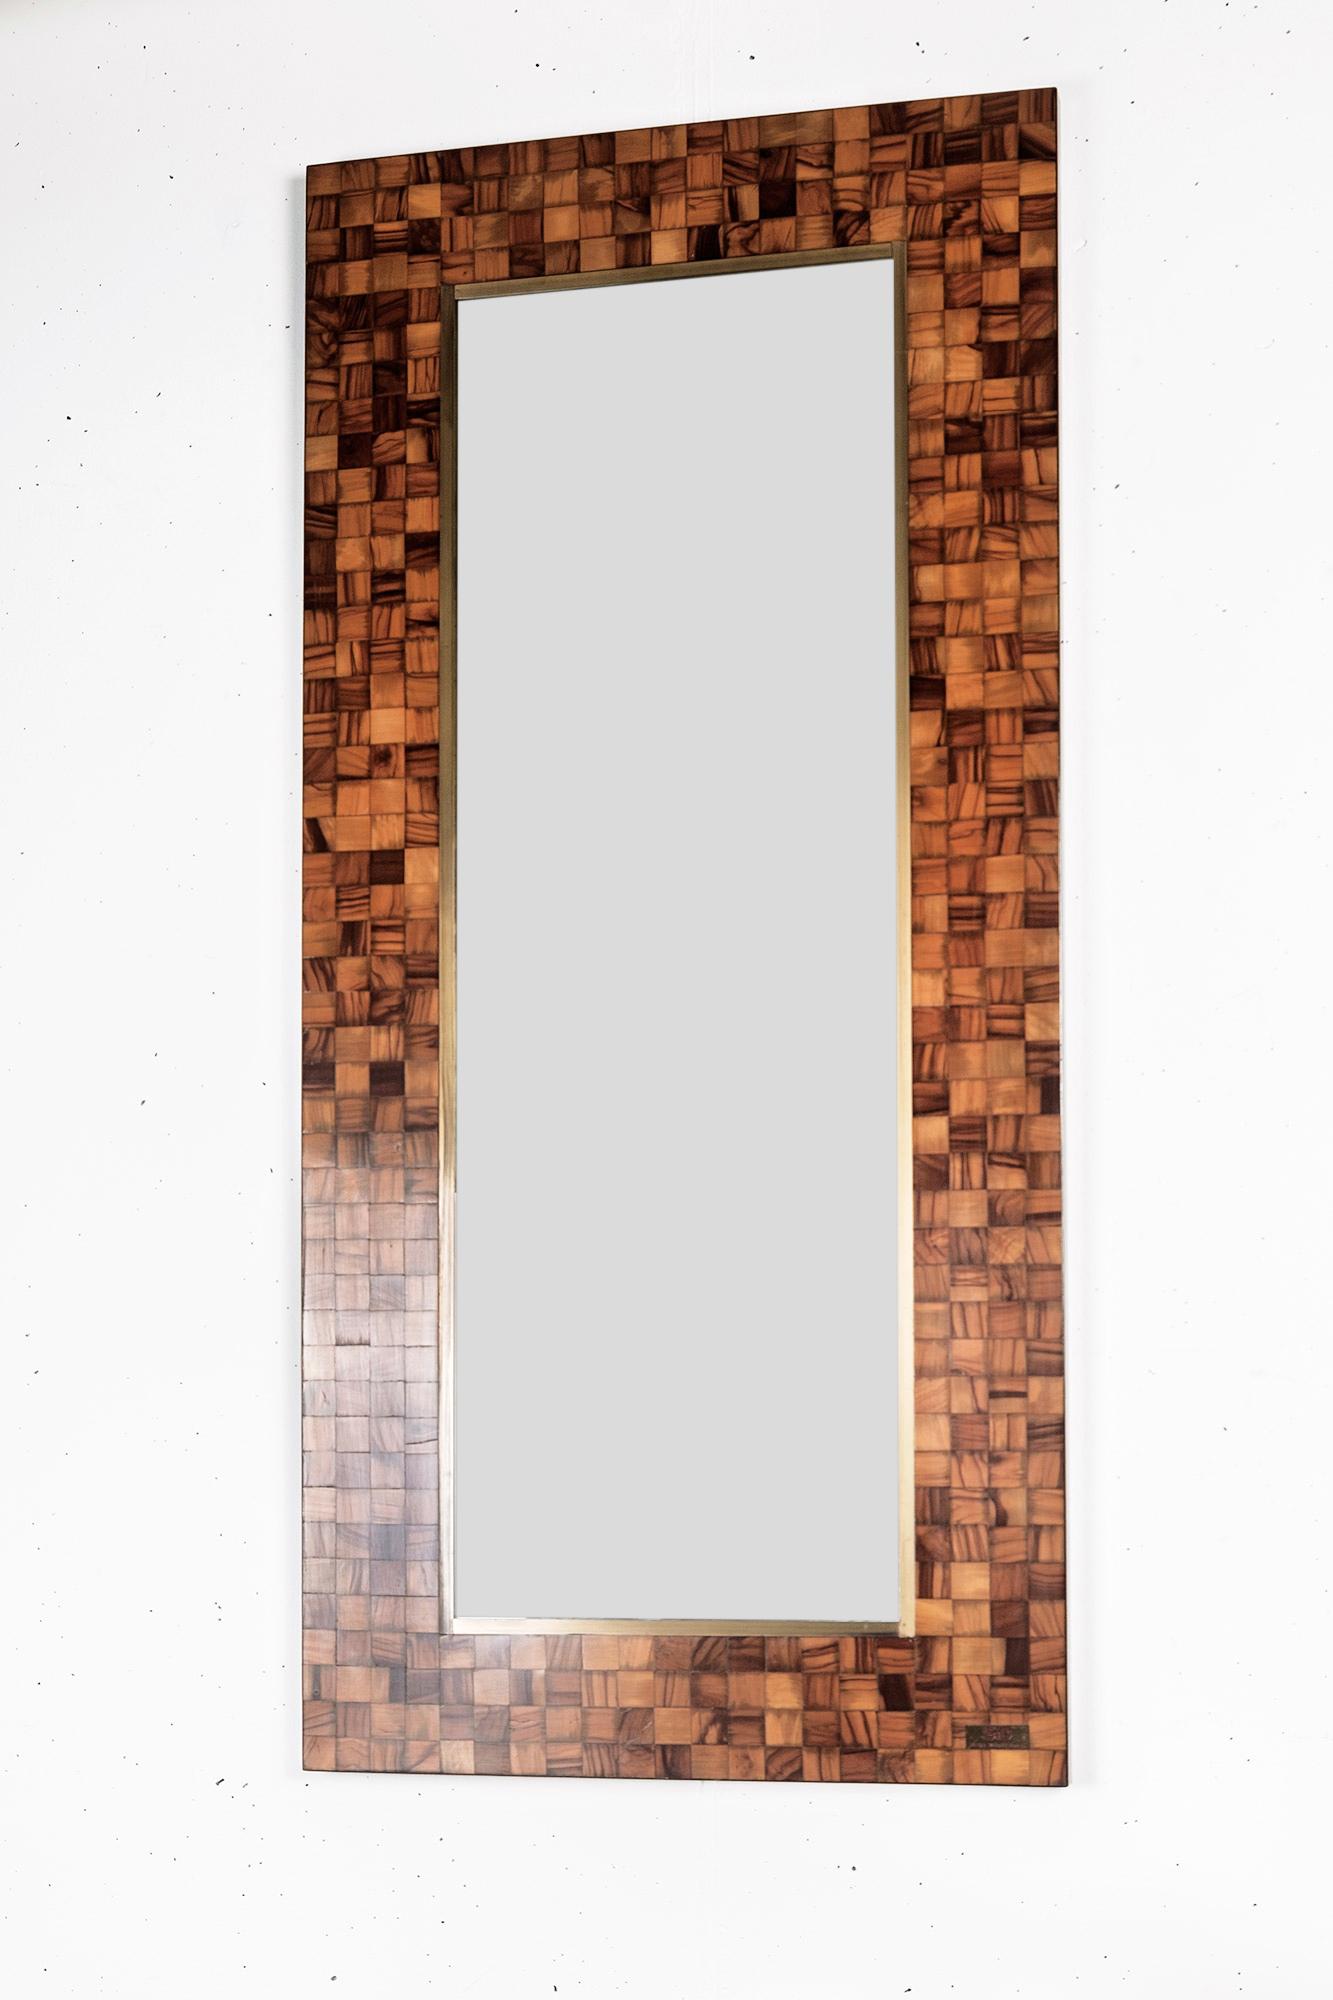 Splendid rare mirror in olive tree marquetry by Sandro Petti for Studio Italiano Design, the mirror is part of an ensemble consisting of a planter, floor ashtray and the mirror.